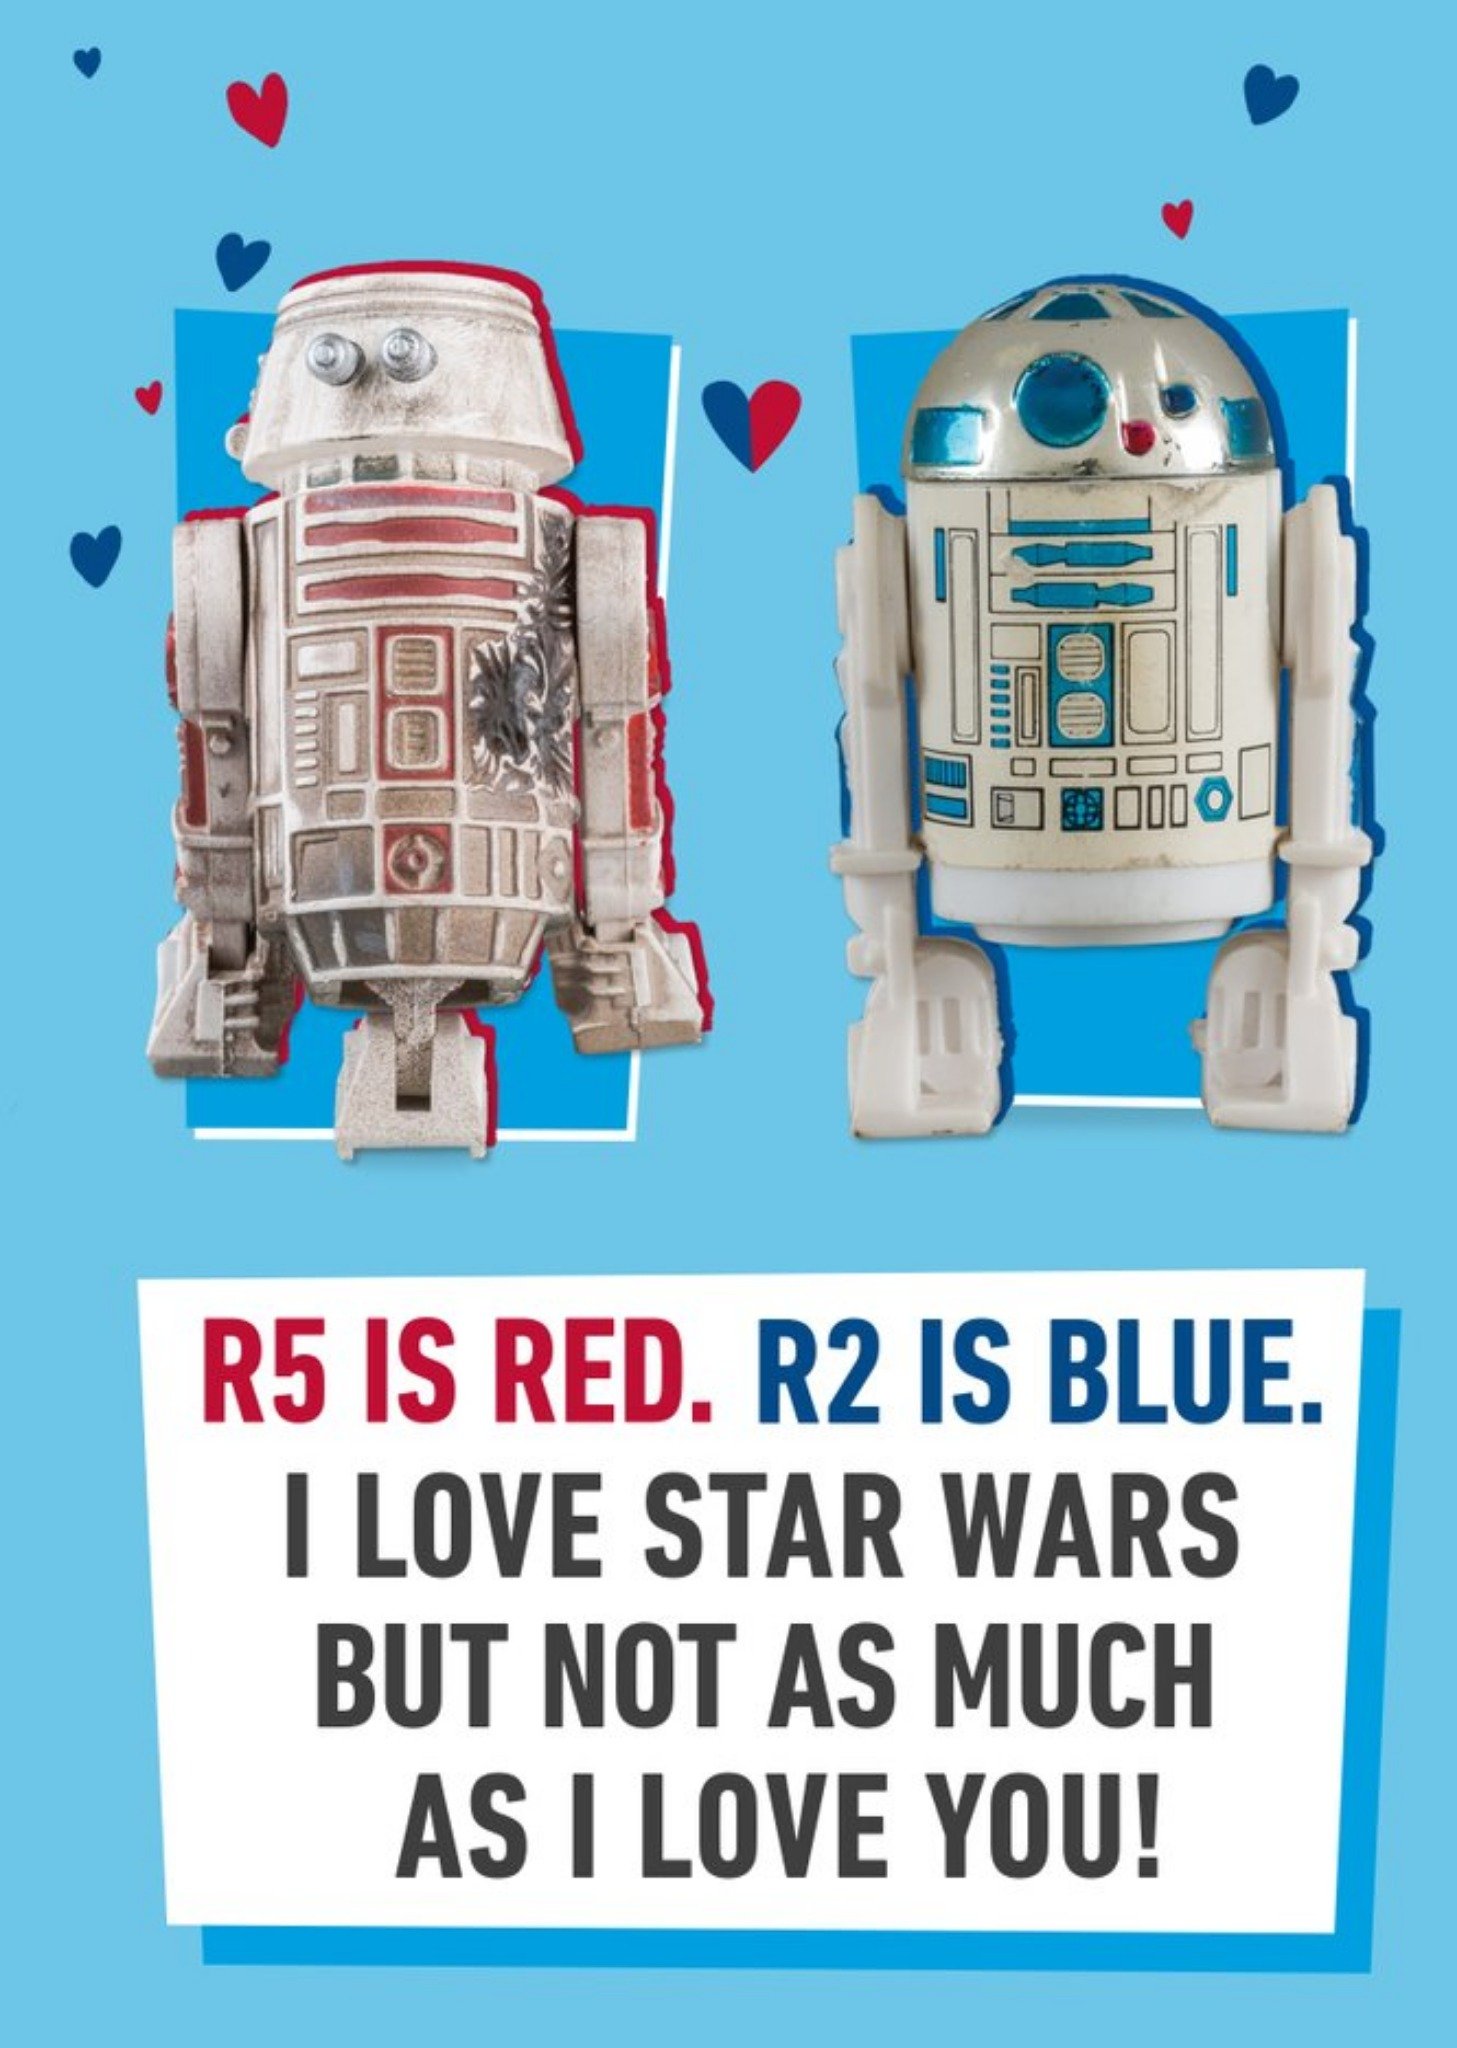 Disney Star Wars I Love Star Wars But Not As Much As I Love You Anniversary Card Ecard